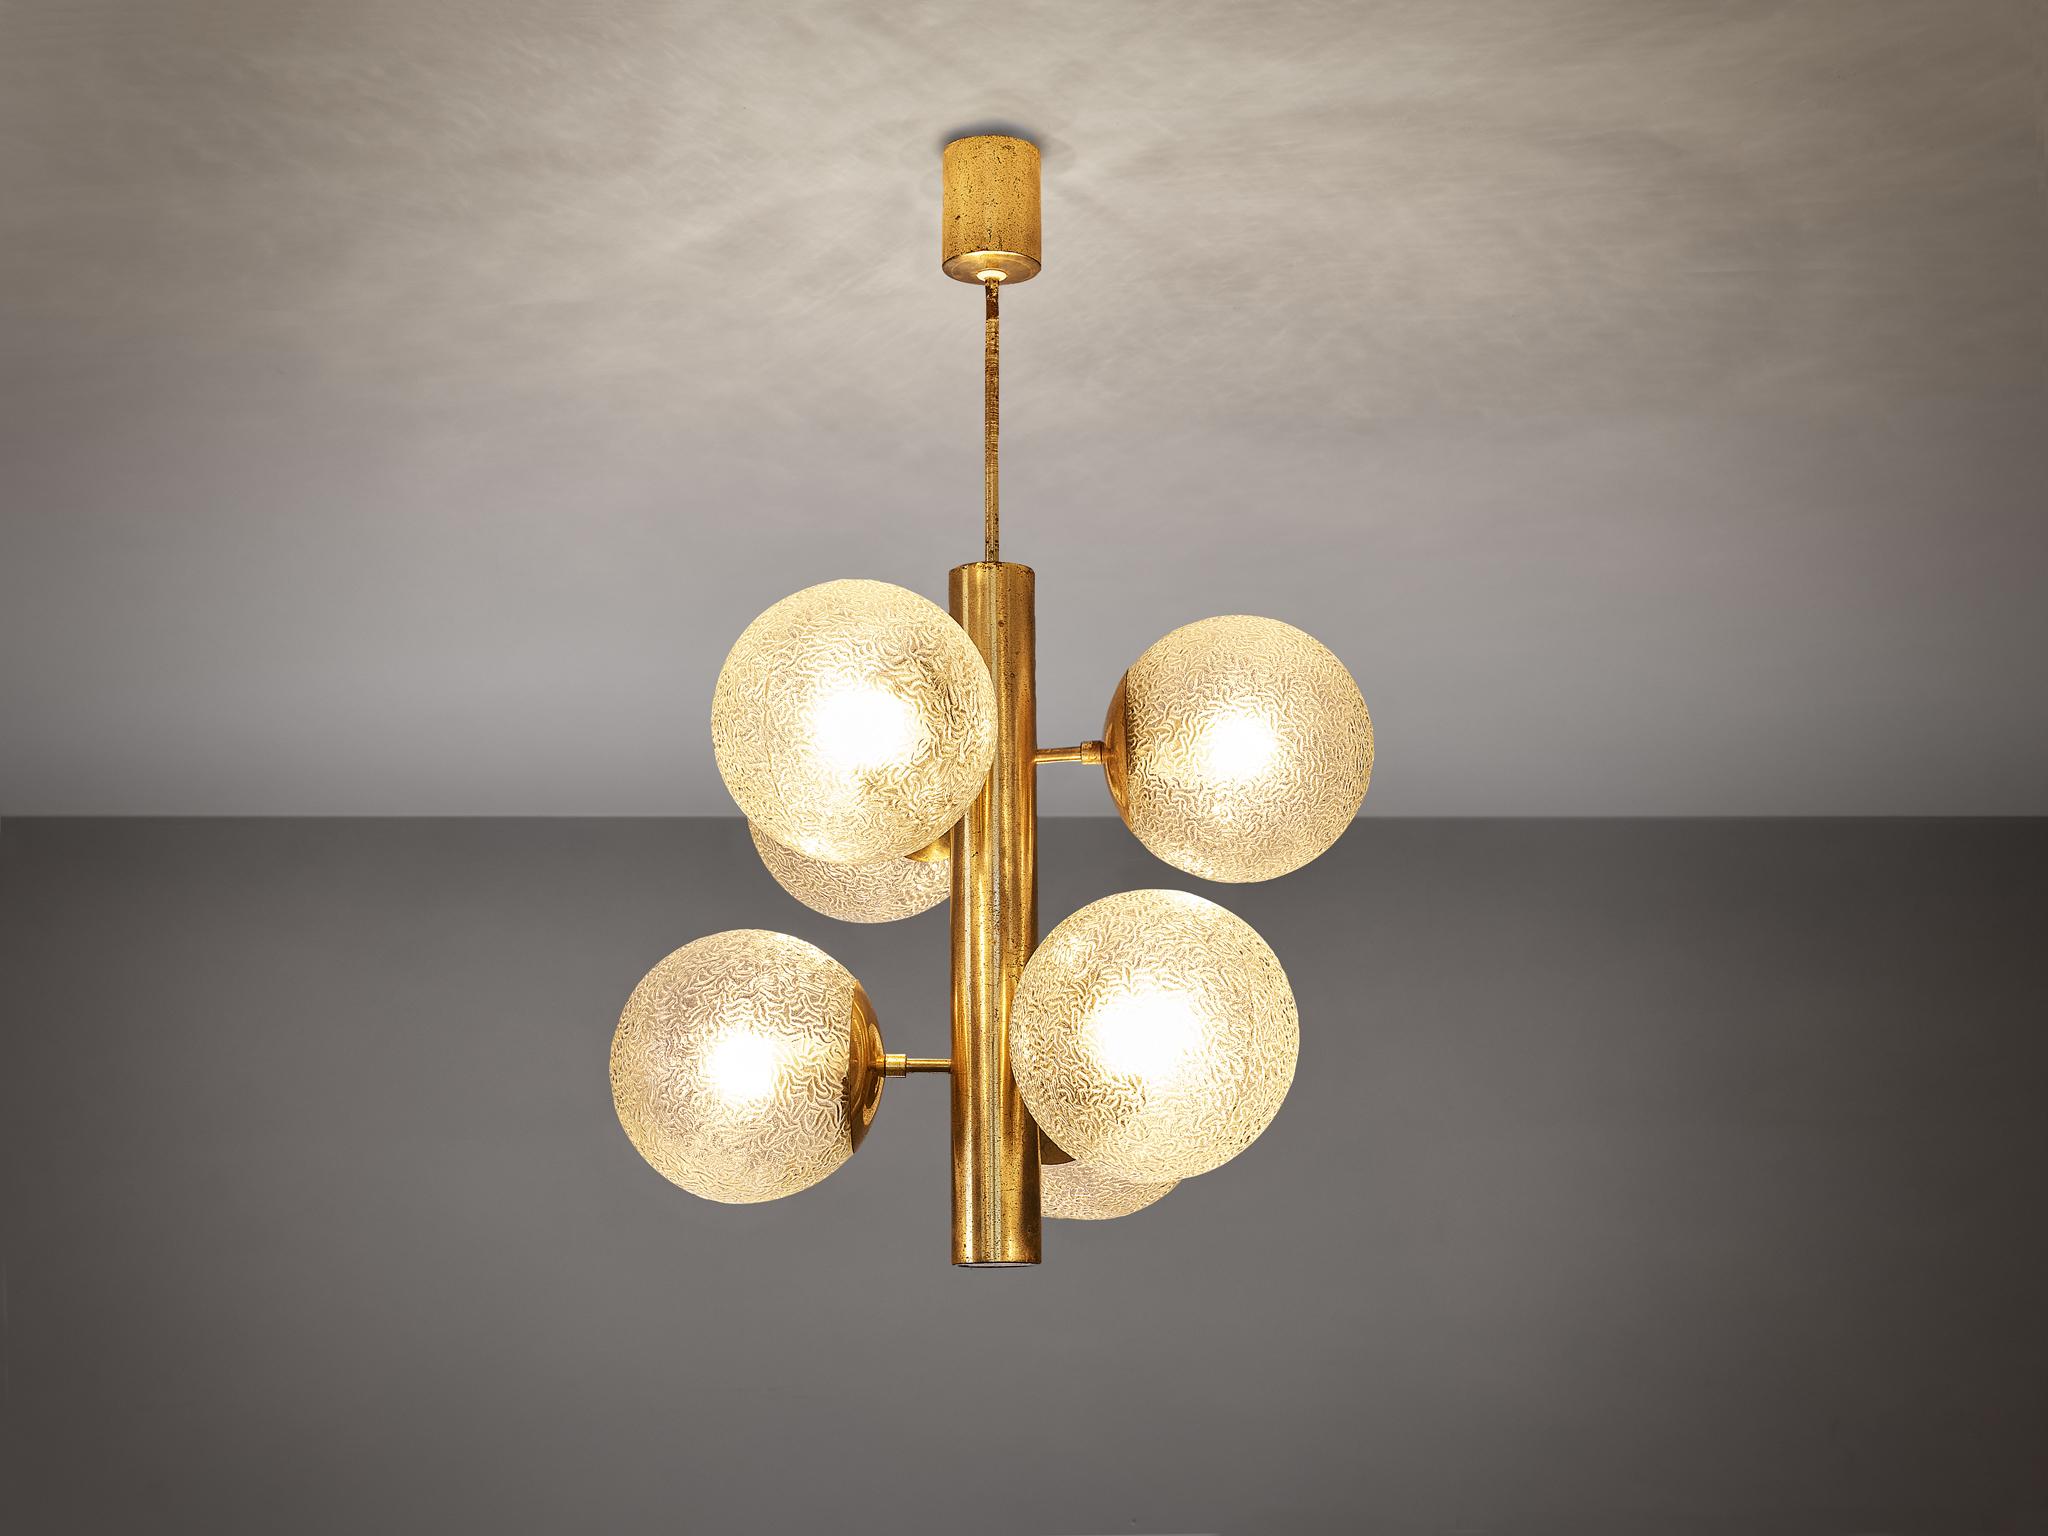 Sputnik chandelier, in brass, metal, textured glass, Europe, 1970s. 

This layered Sputnik chandelier features six wonderful textured glass globes. The chandeliers consist of a stunning, elegant fixture with six arms. On each arm, a glass sphere is